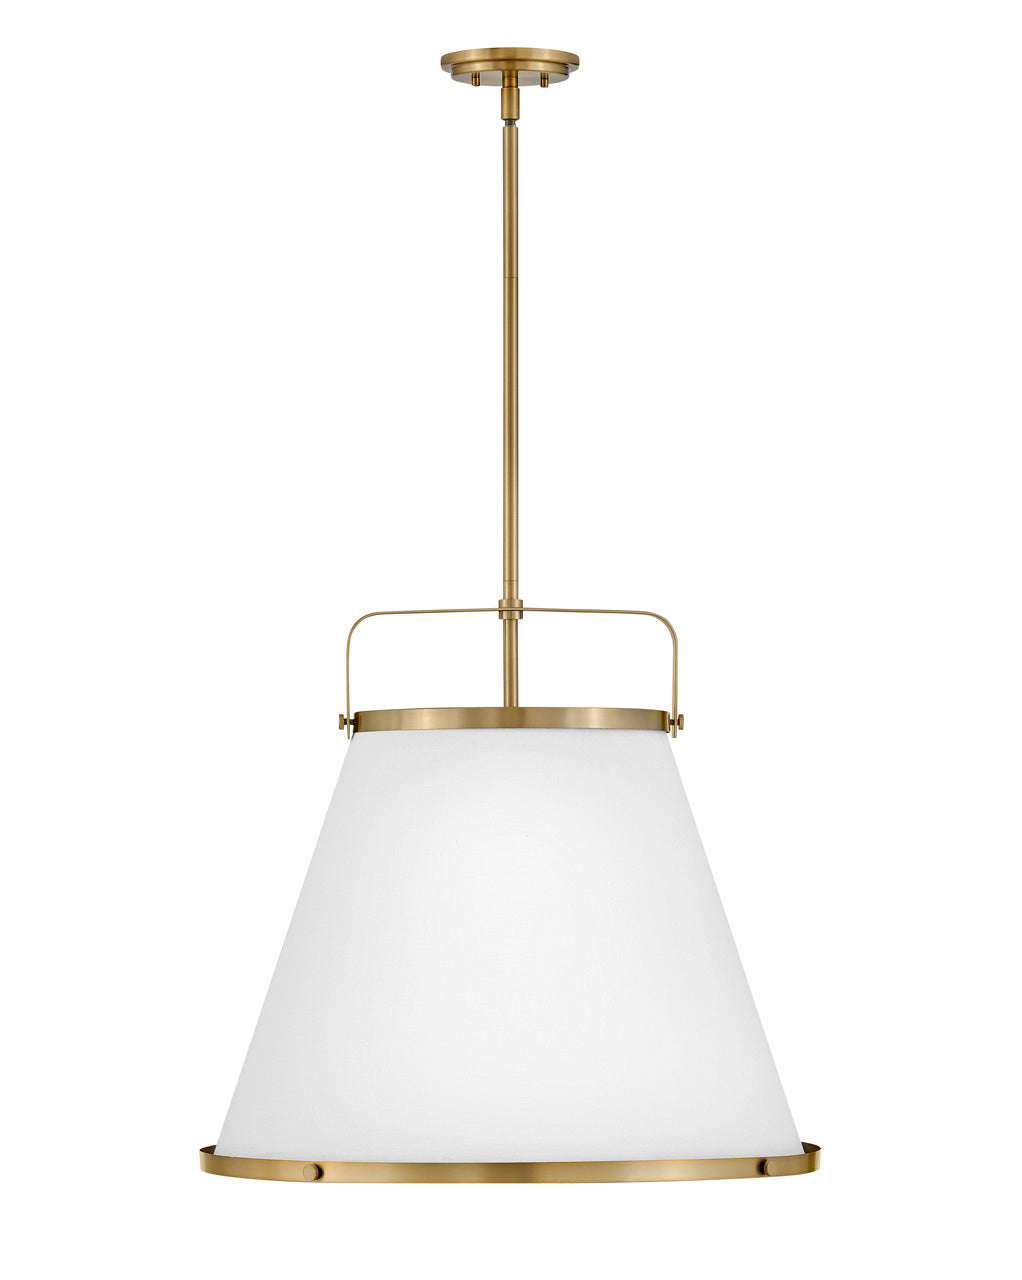 Hinkley - 4995LCB - LED Pendant - Lexi - Lacquered Brass